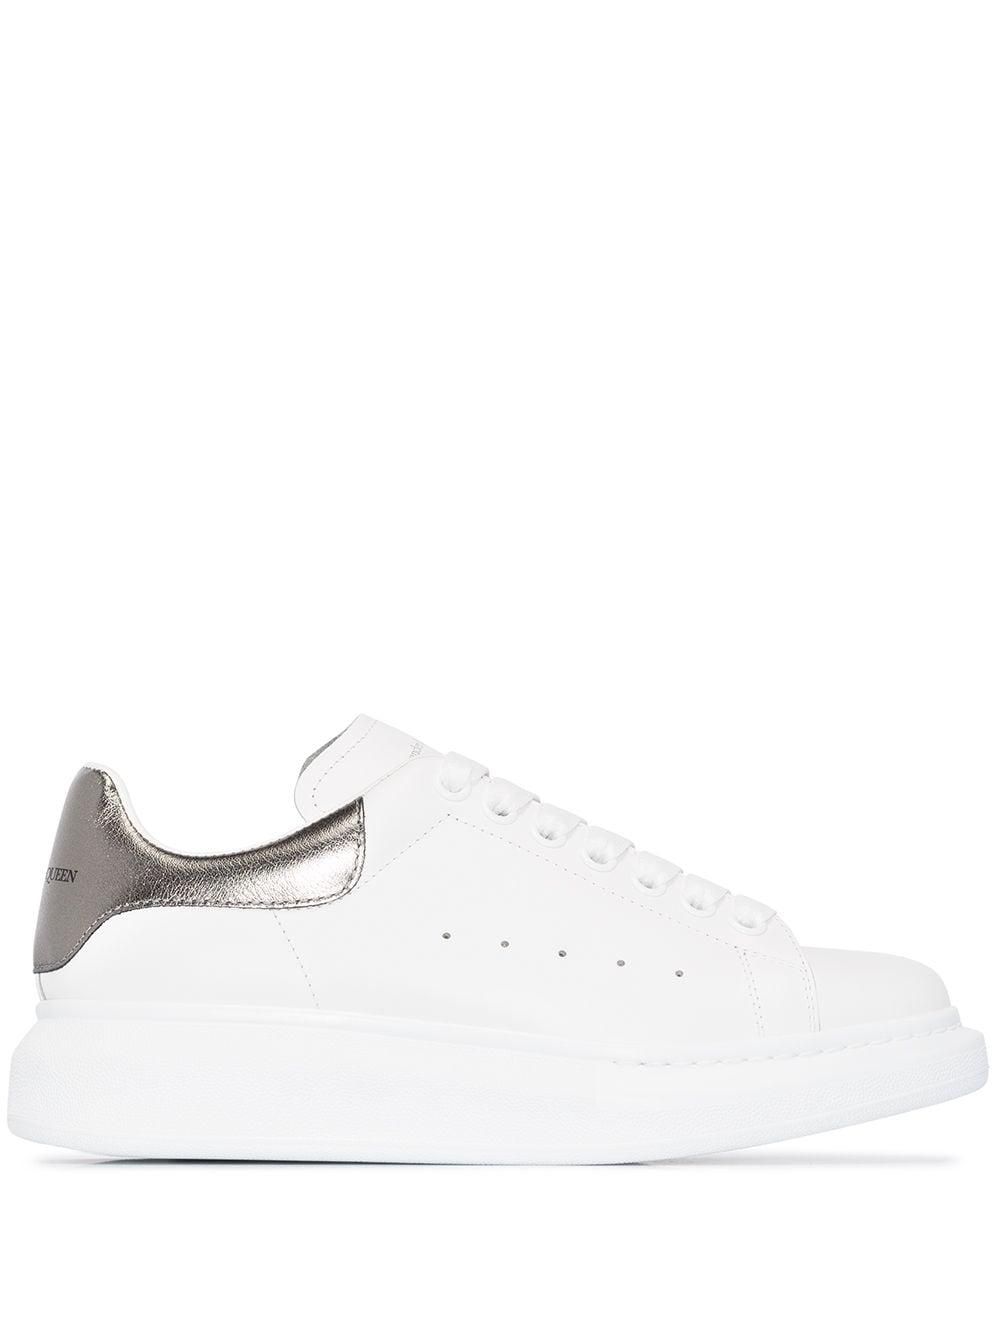 Alexander McQueen Leather Sneakers Grey in Gray - Save 27% | Lyst